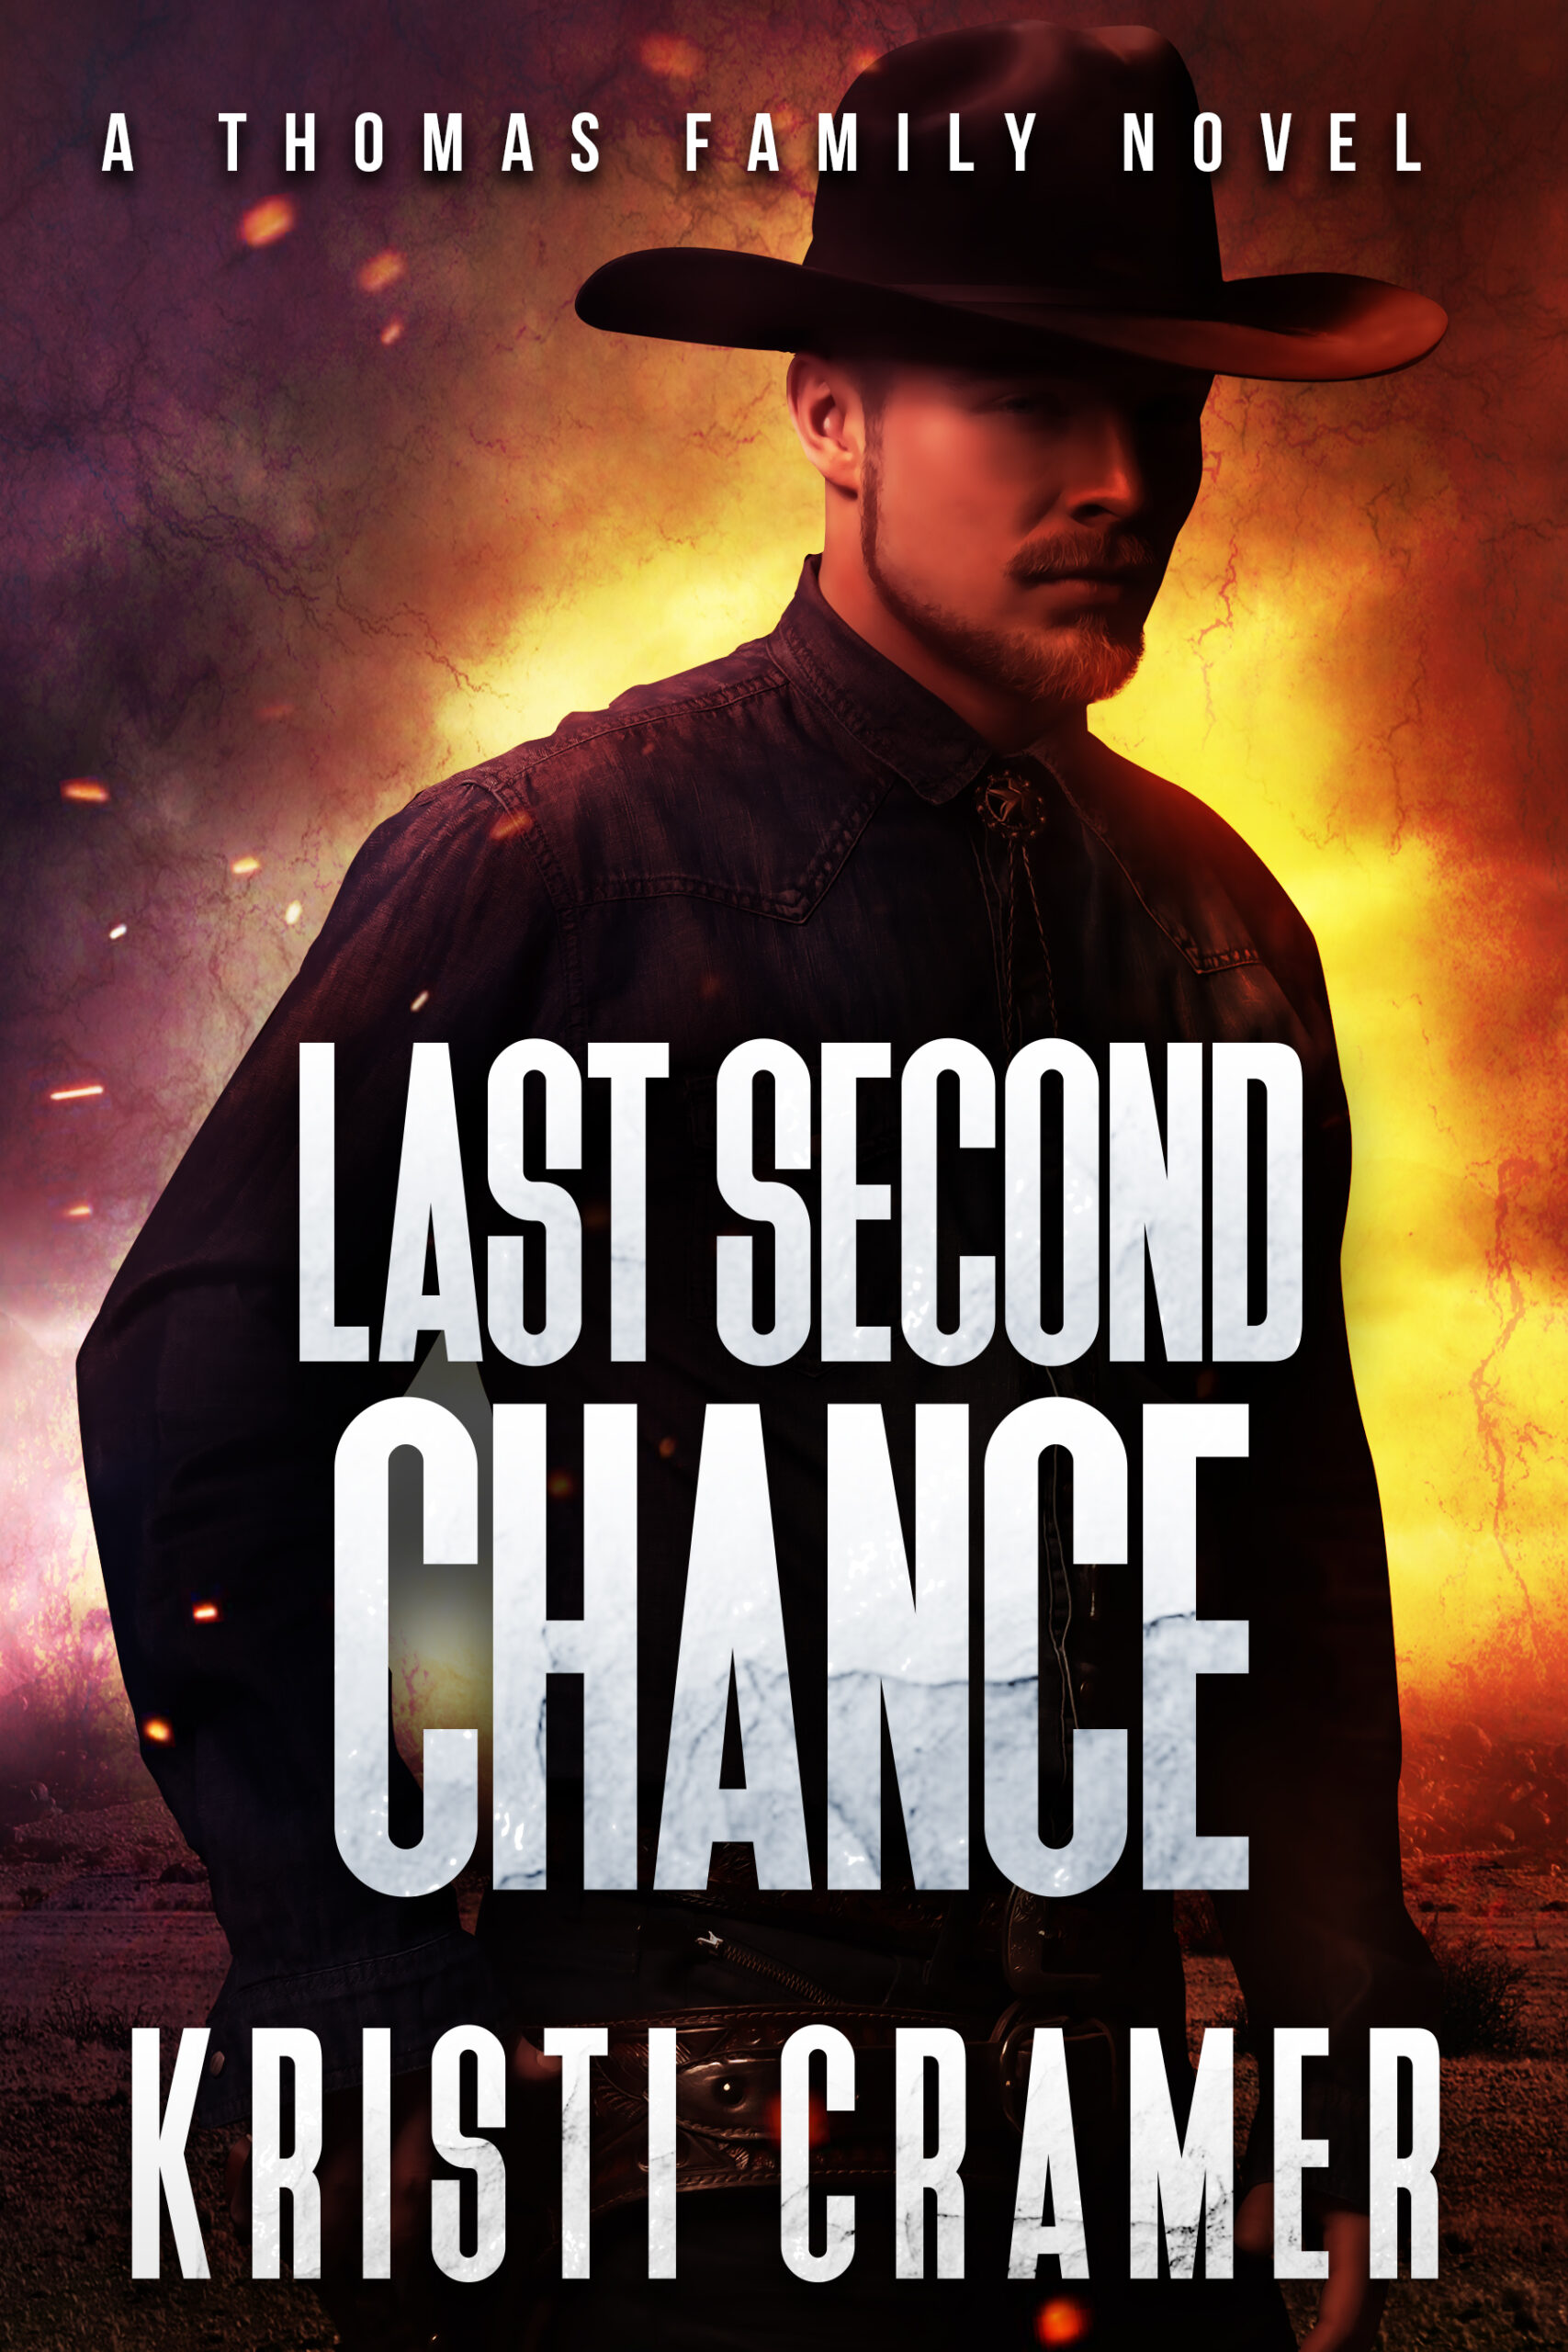 Last Second Chance - the Second Thomas Family Novel